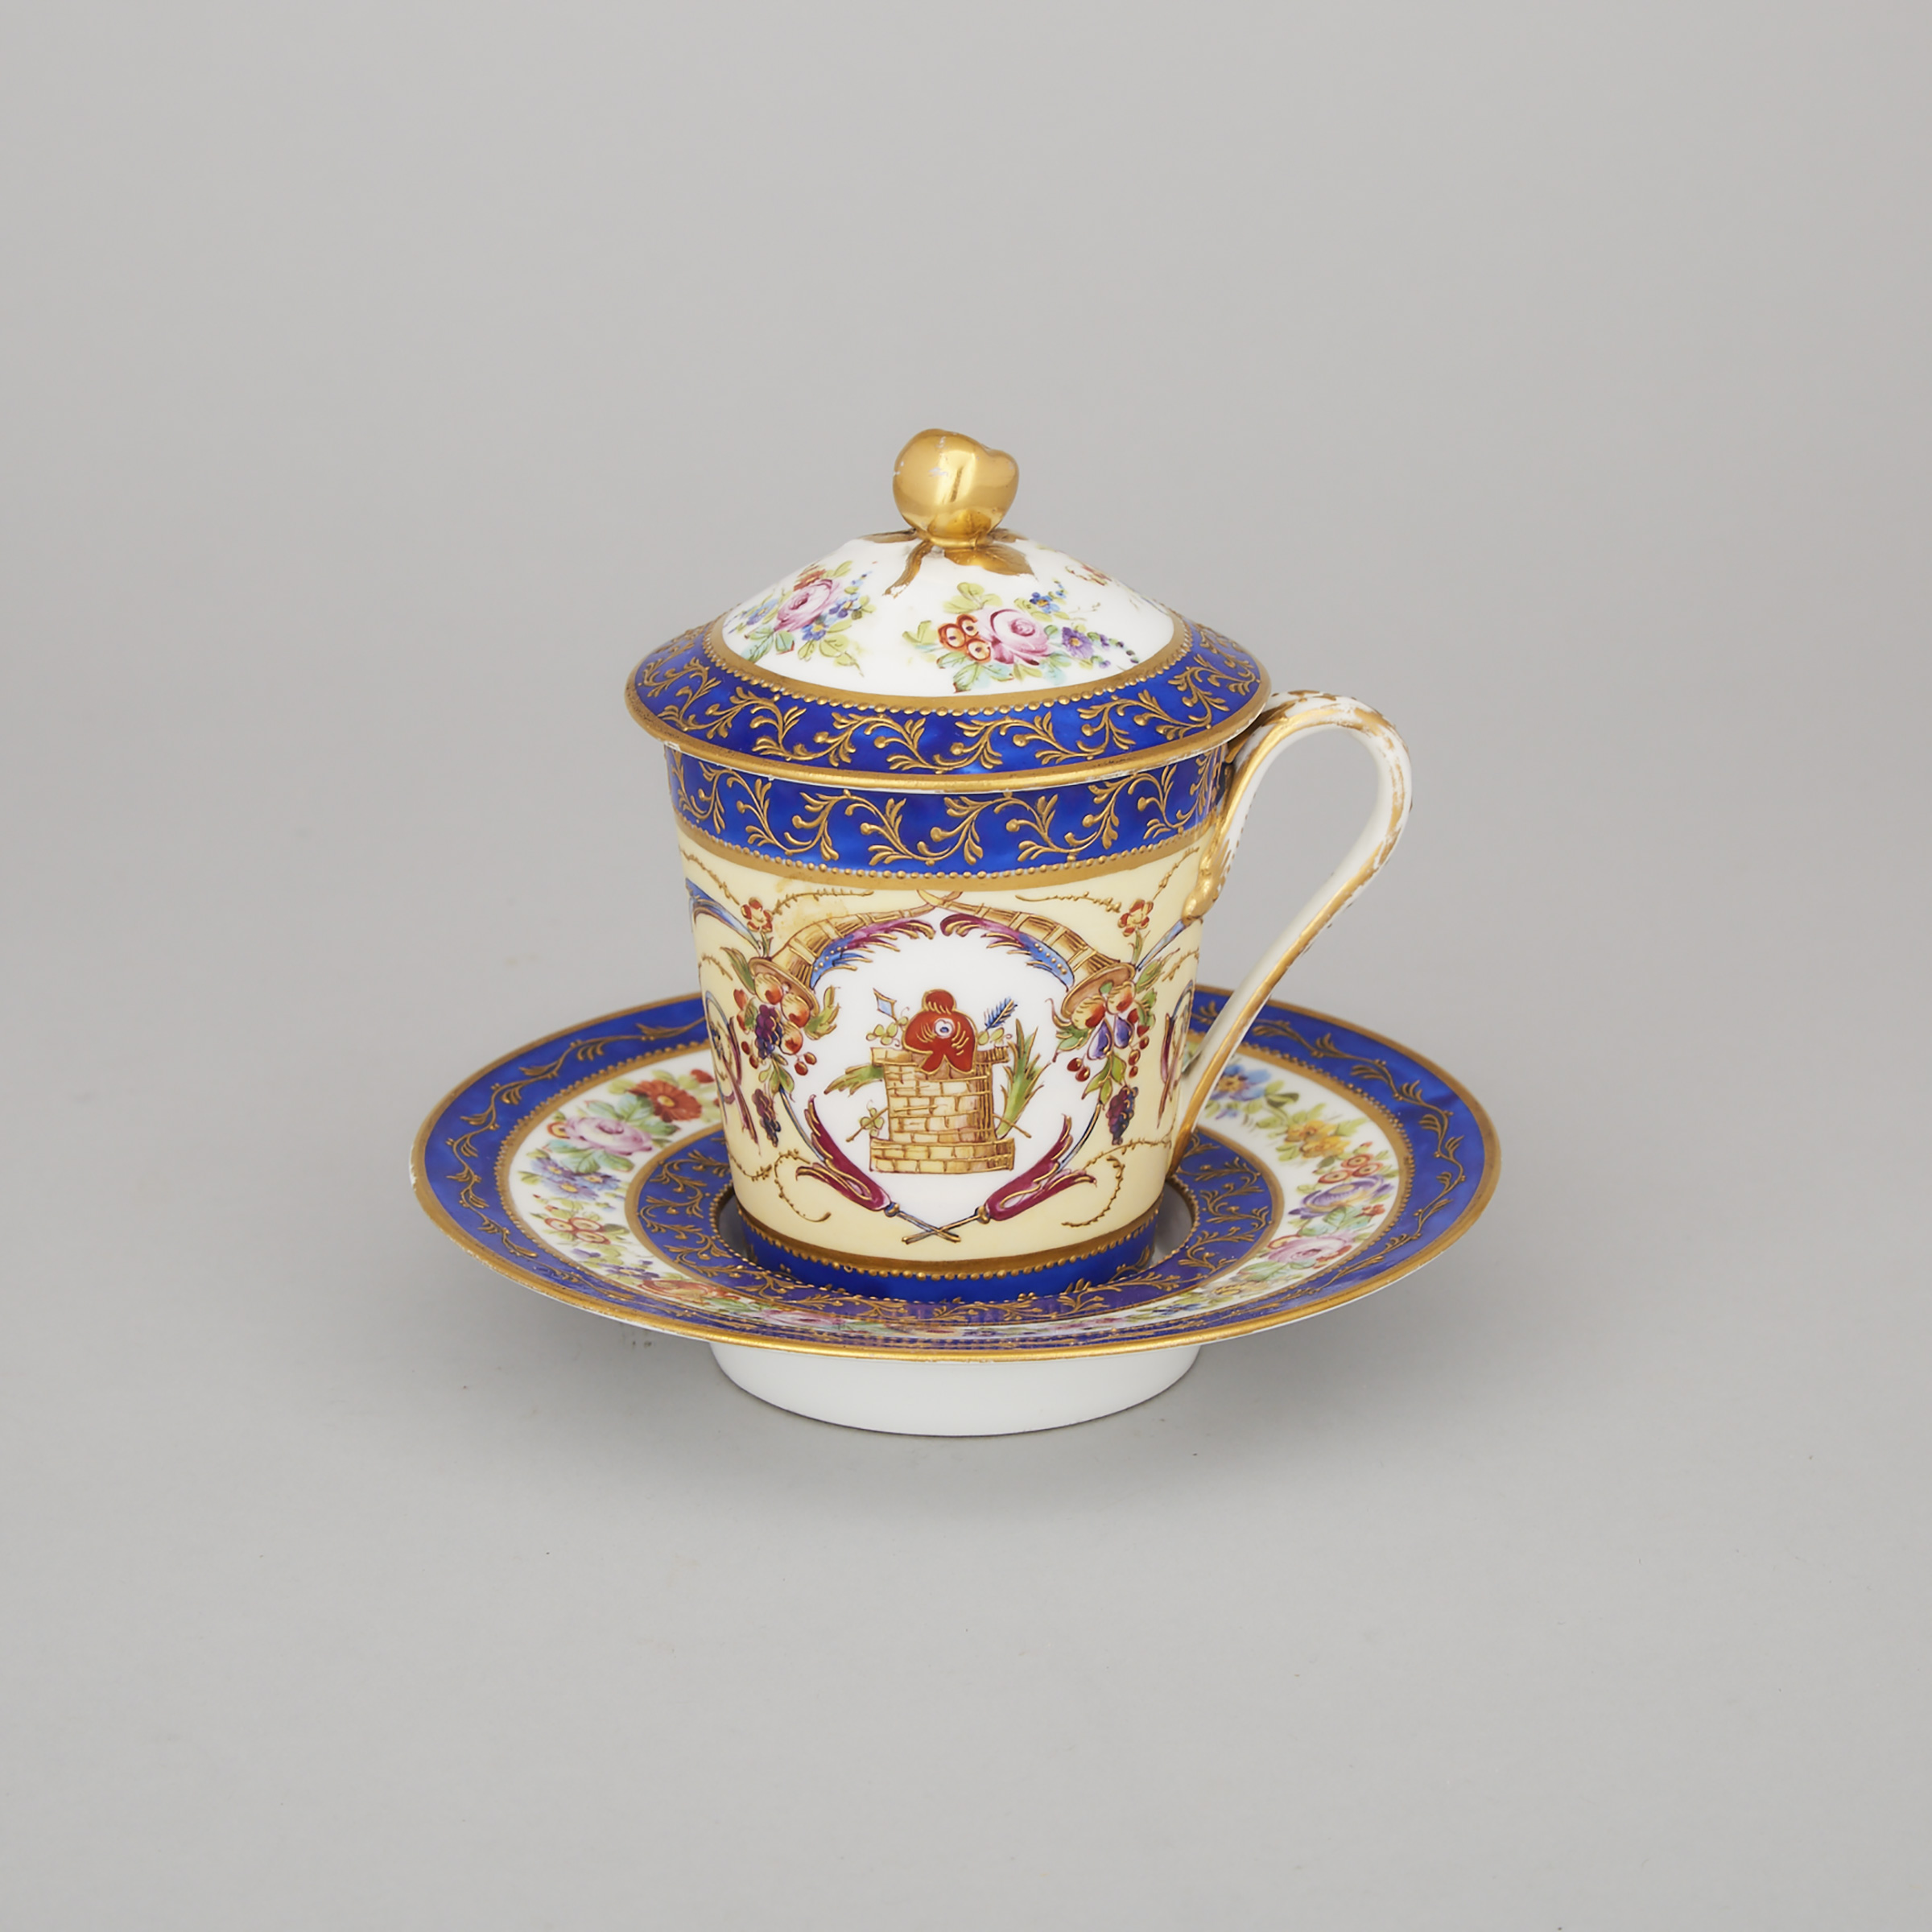 'Sèvres' Floral, Yellow, Blue and Gilt Decorated Chocolate Cup with Cover and Stand, late 19th century